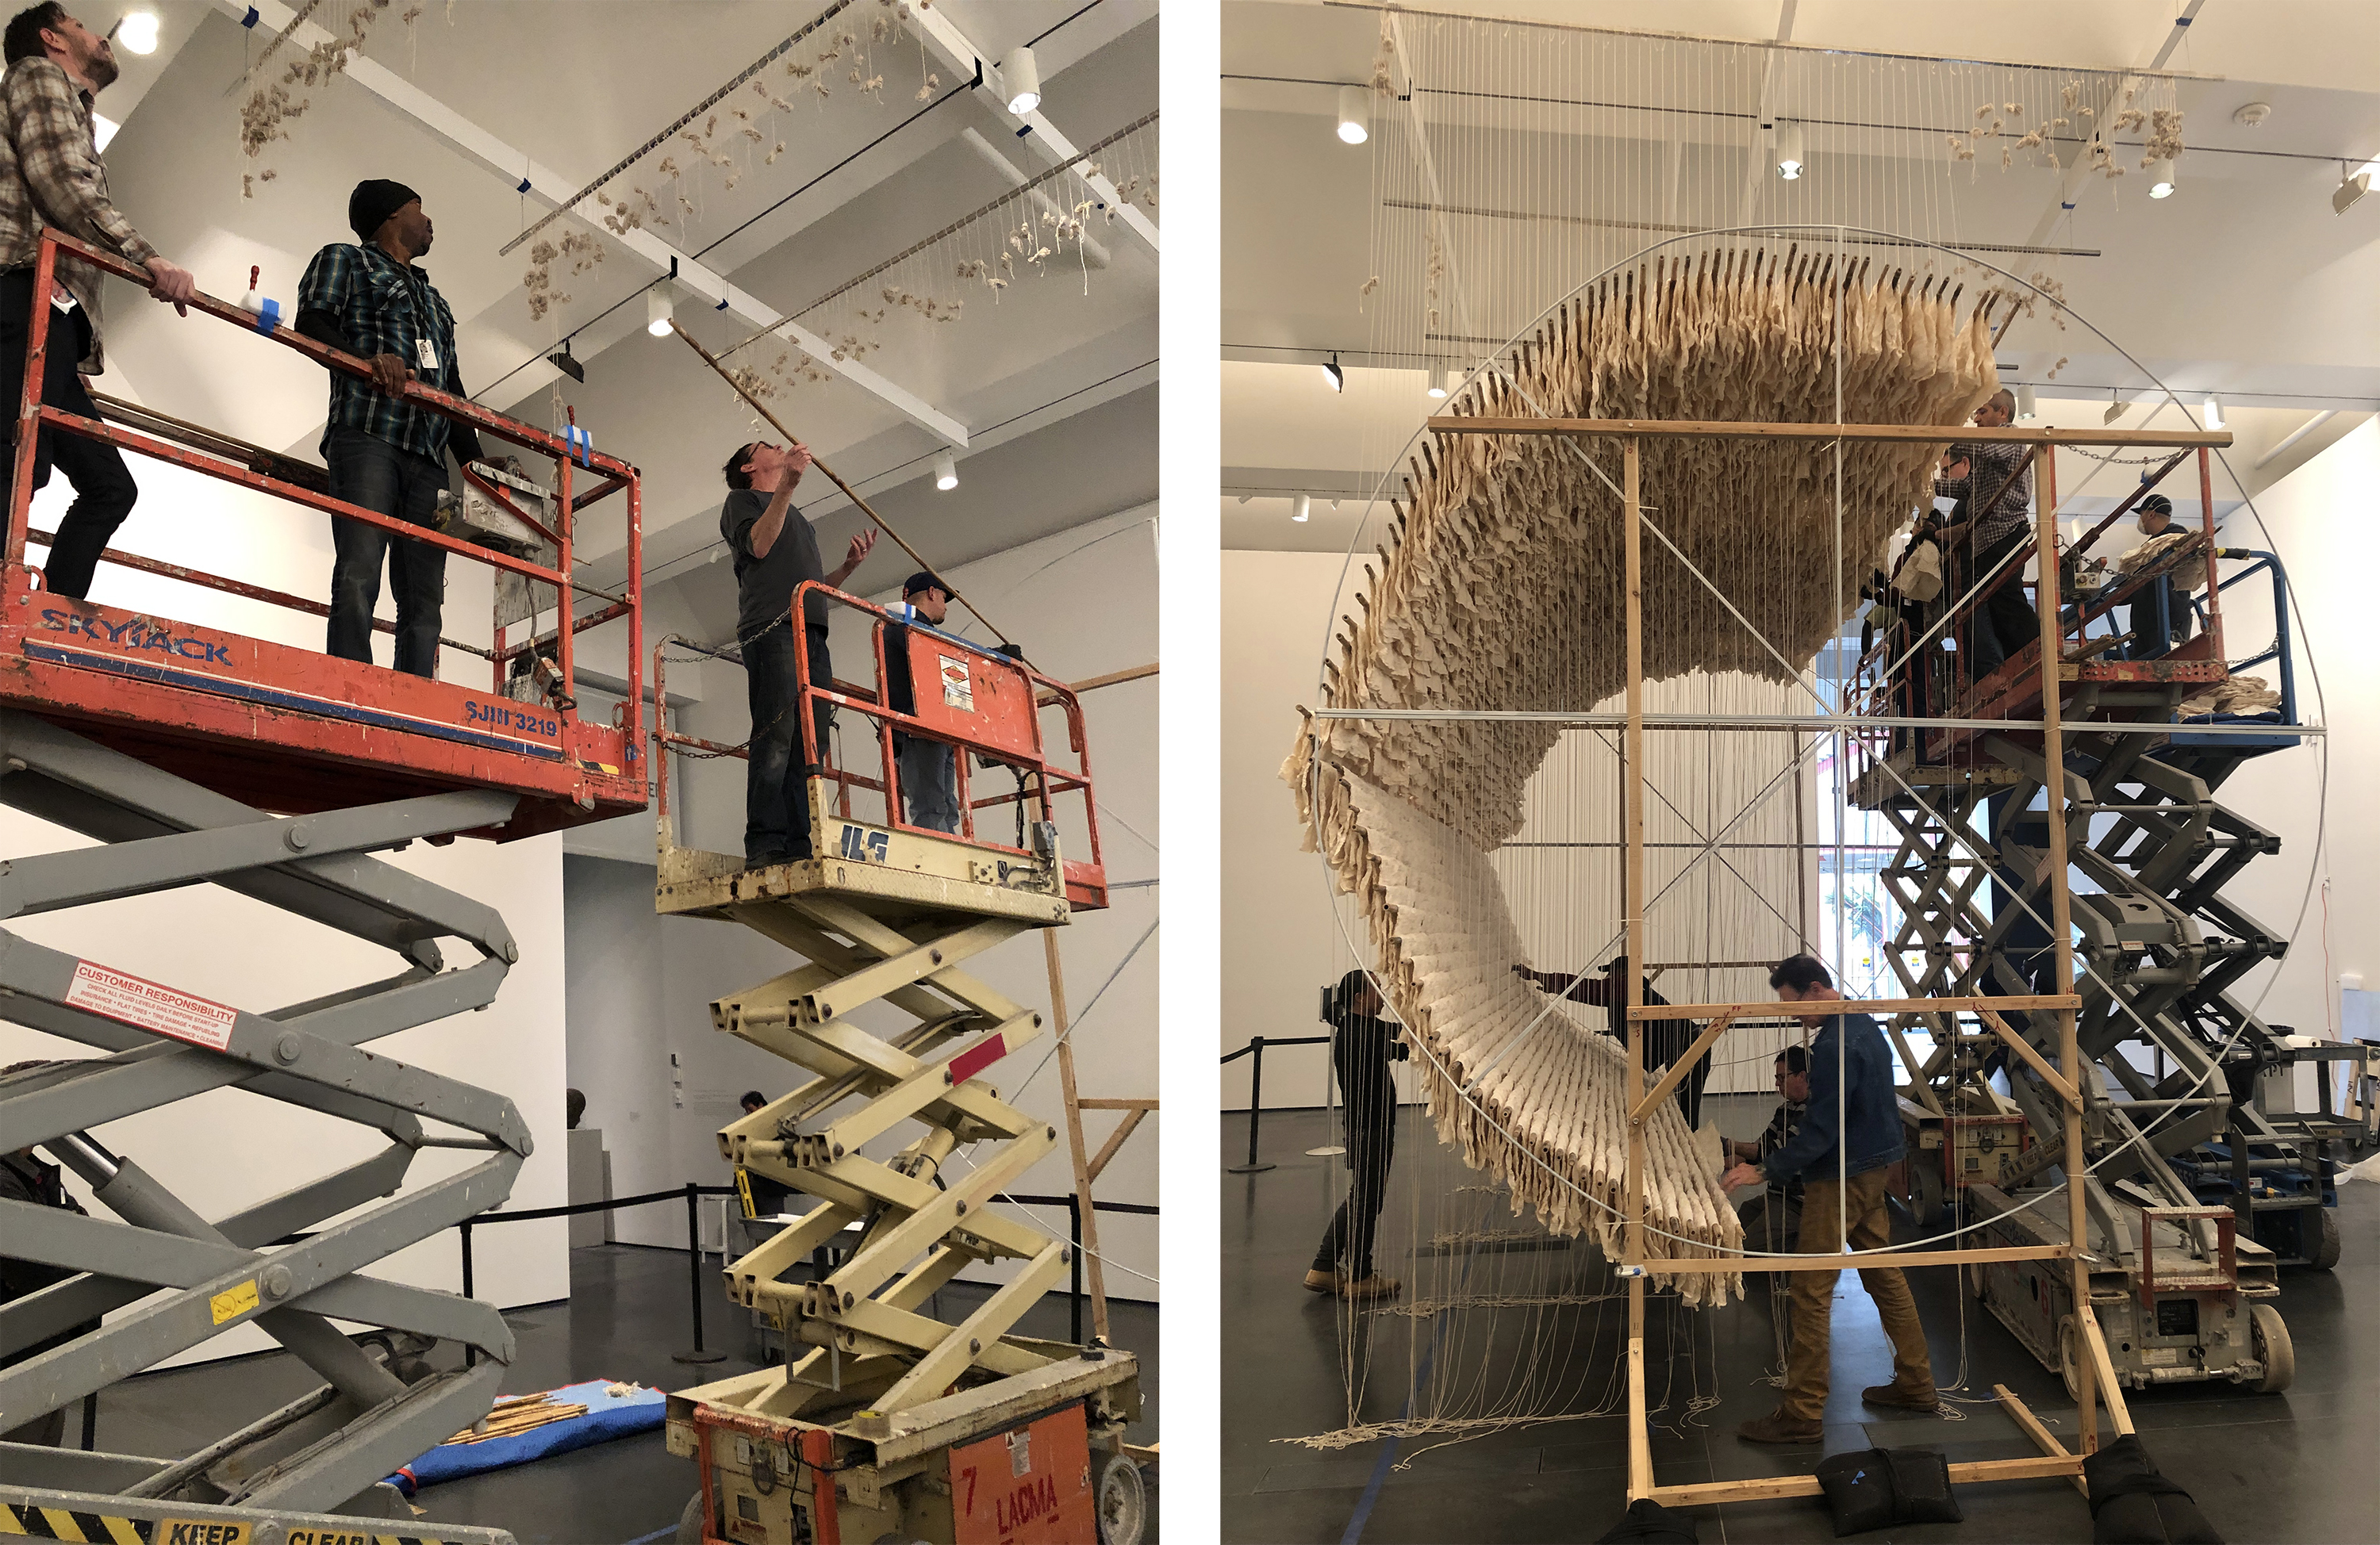 Preparators installing Wave of Materials in LACMA’s Resnick Pavilion 